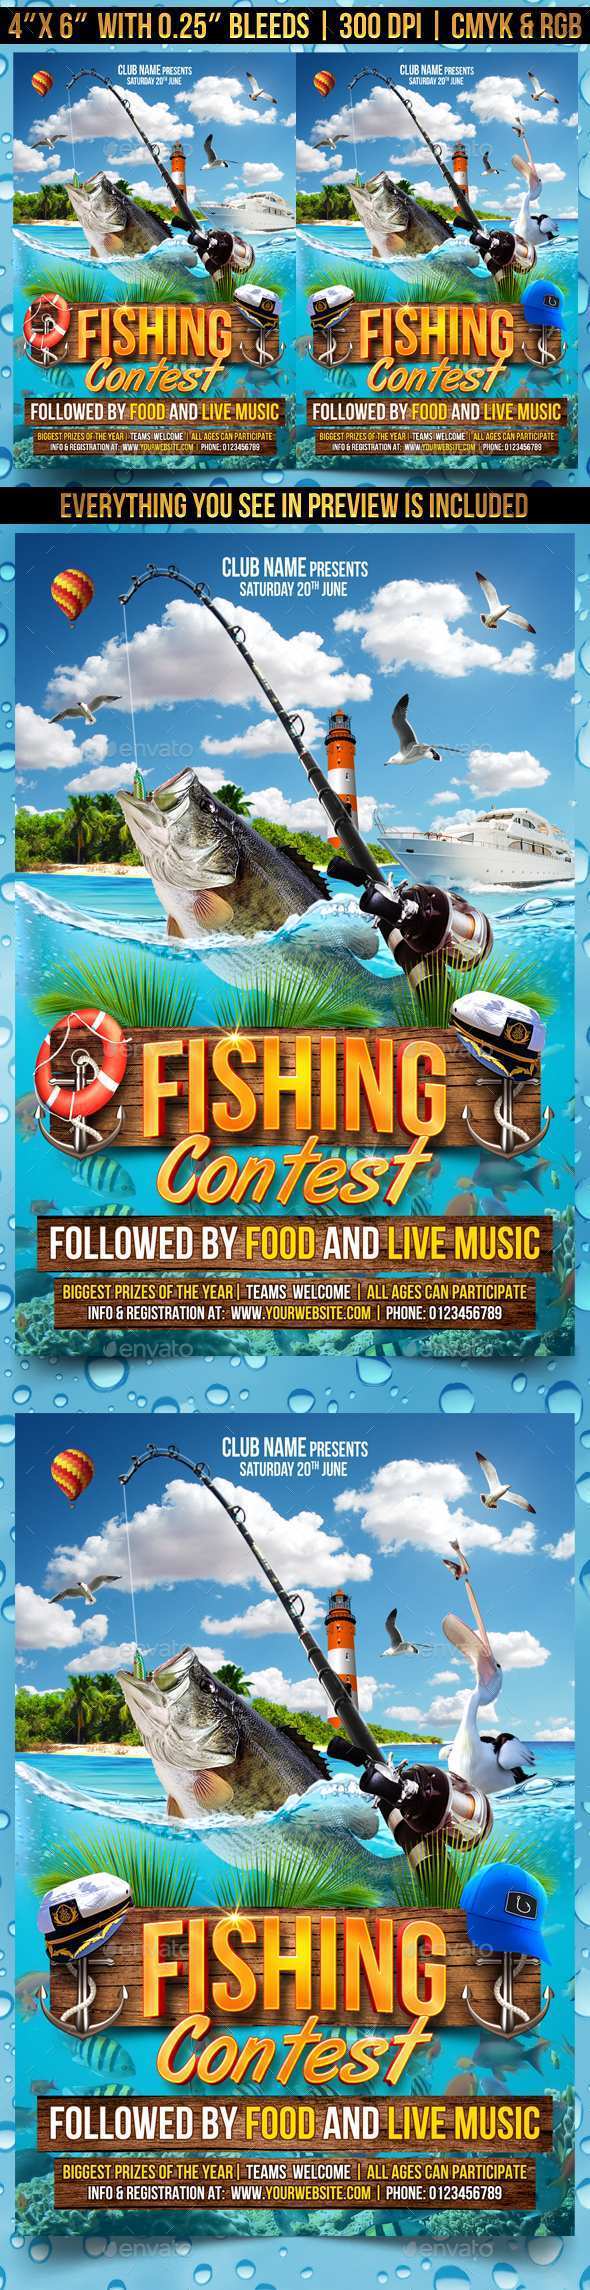 69 Customize Our Free Fishing Tournament Flyer Template Layouts By Fishing Tournament Flyer Template Cards Design Templates